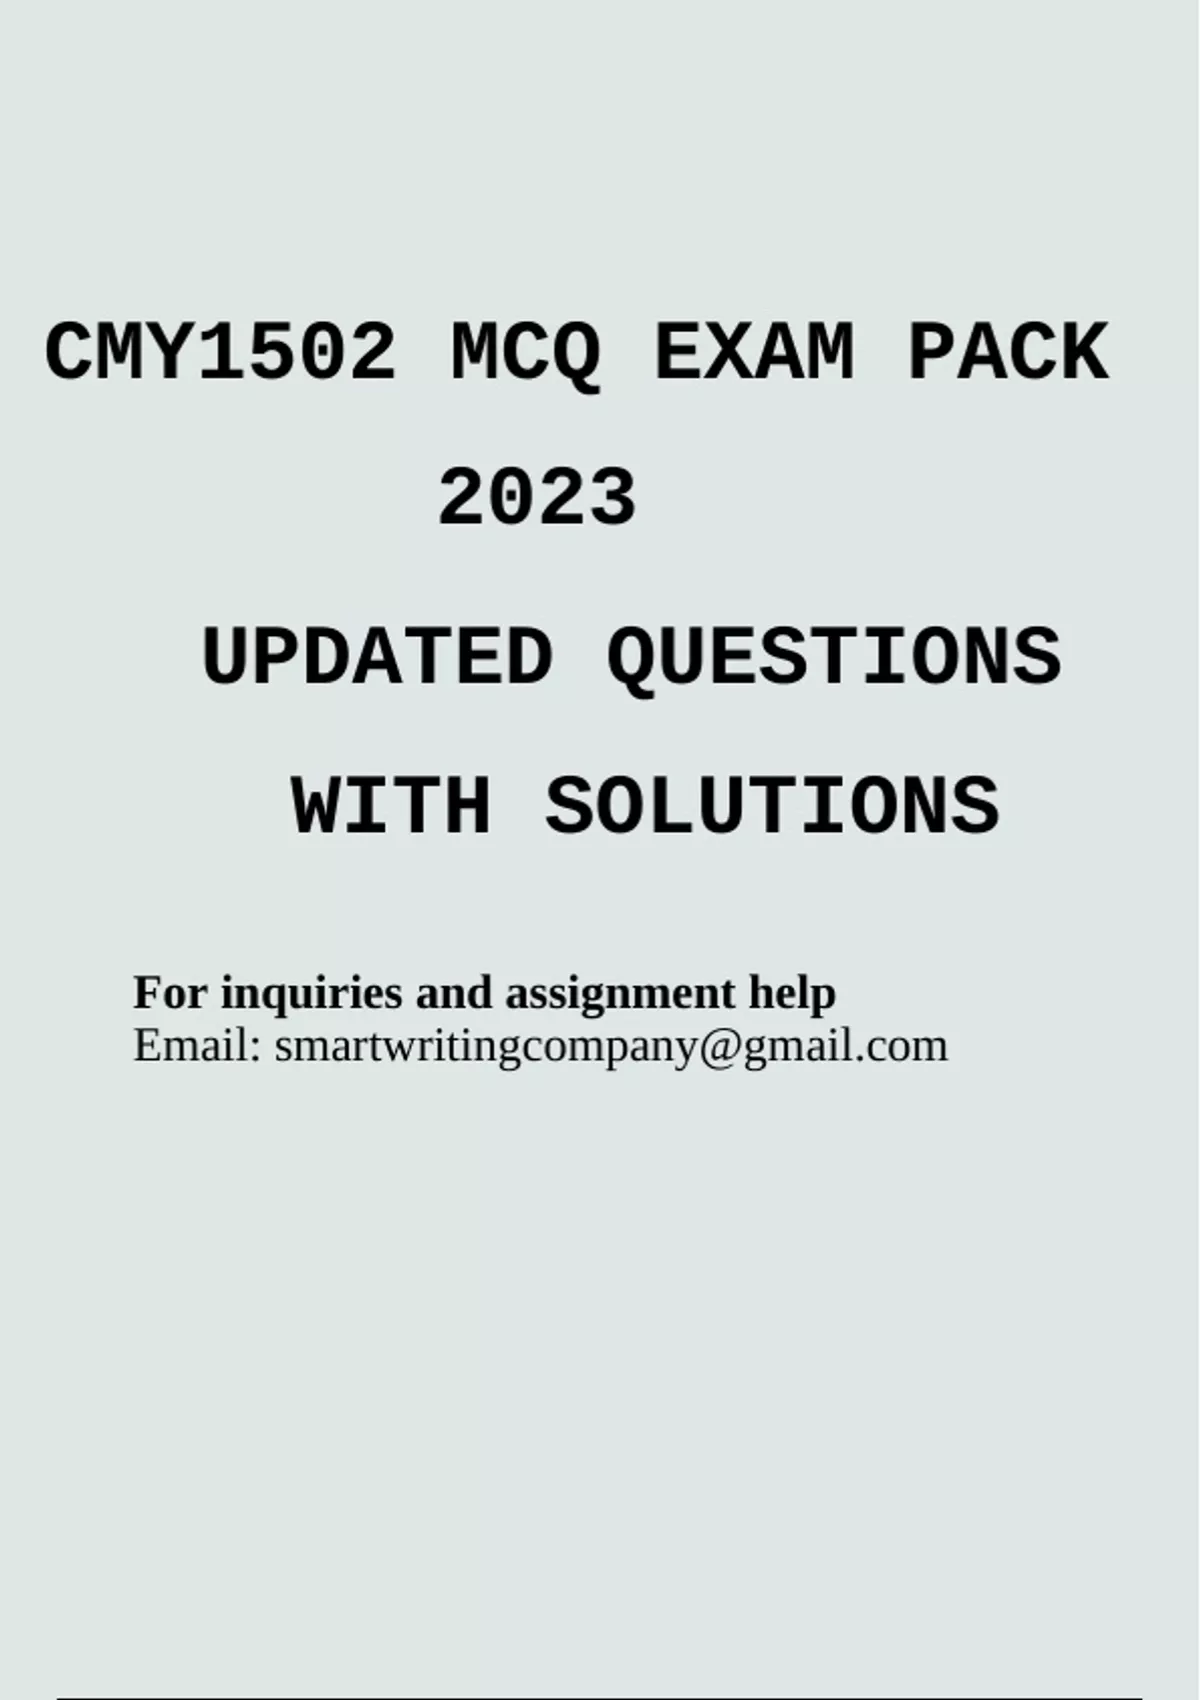 cmy1502 assignment 1 answers 2022